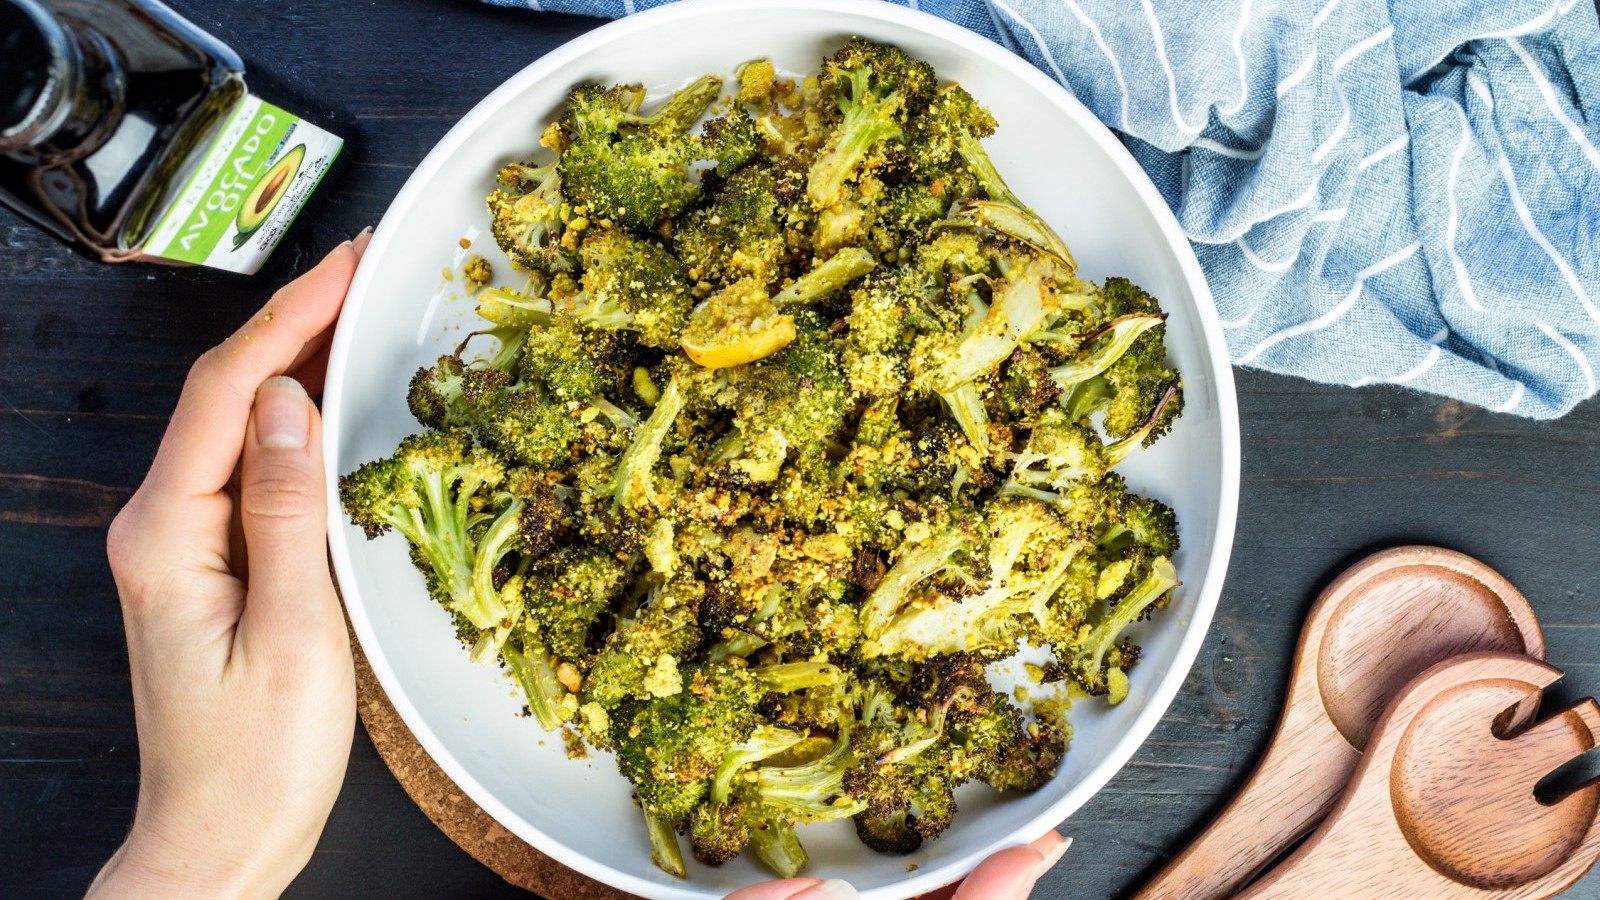 Image of Roasted Broccoli with Cheese Sauce